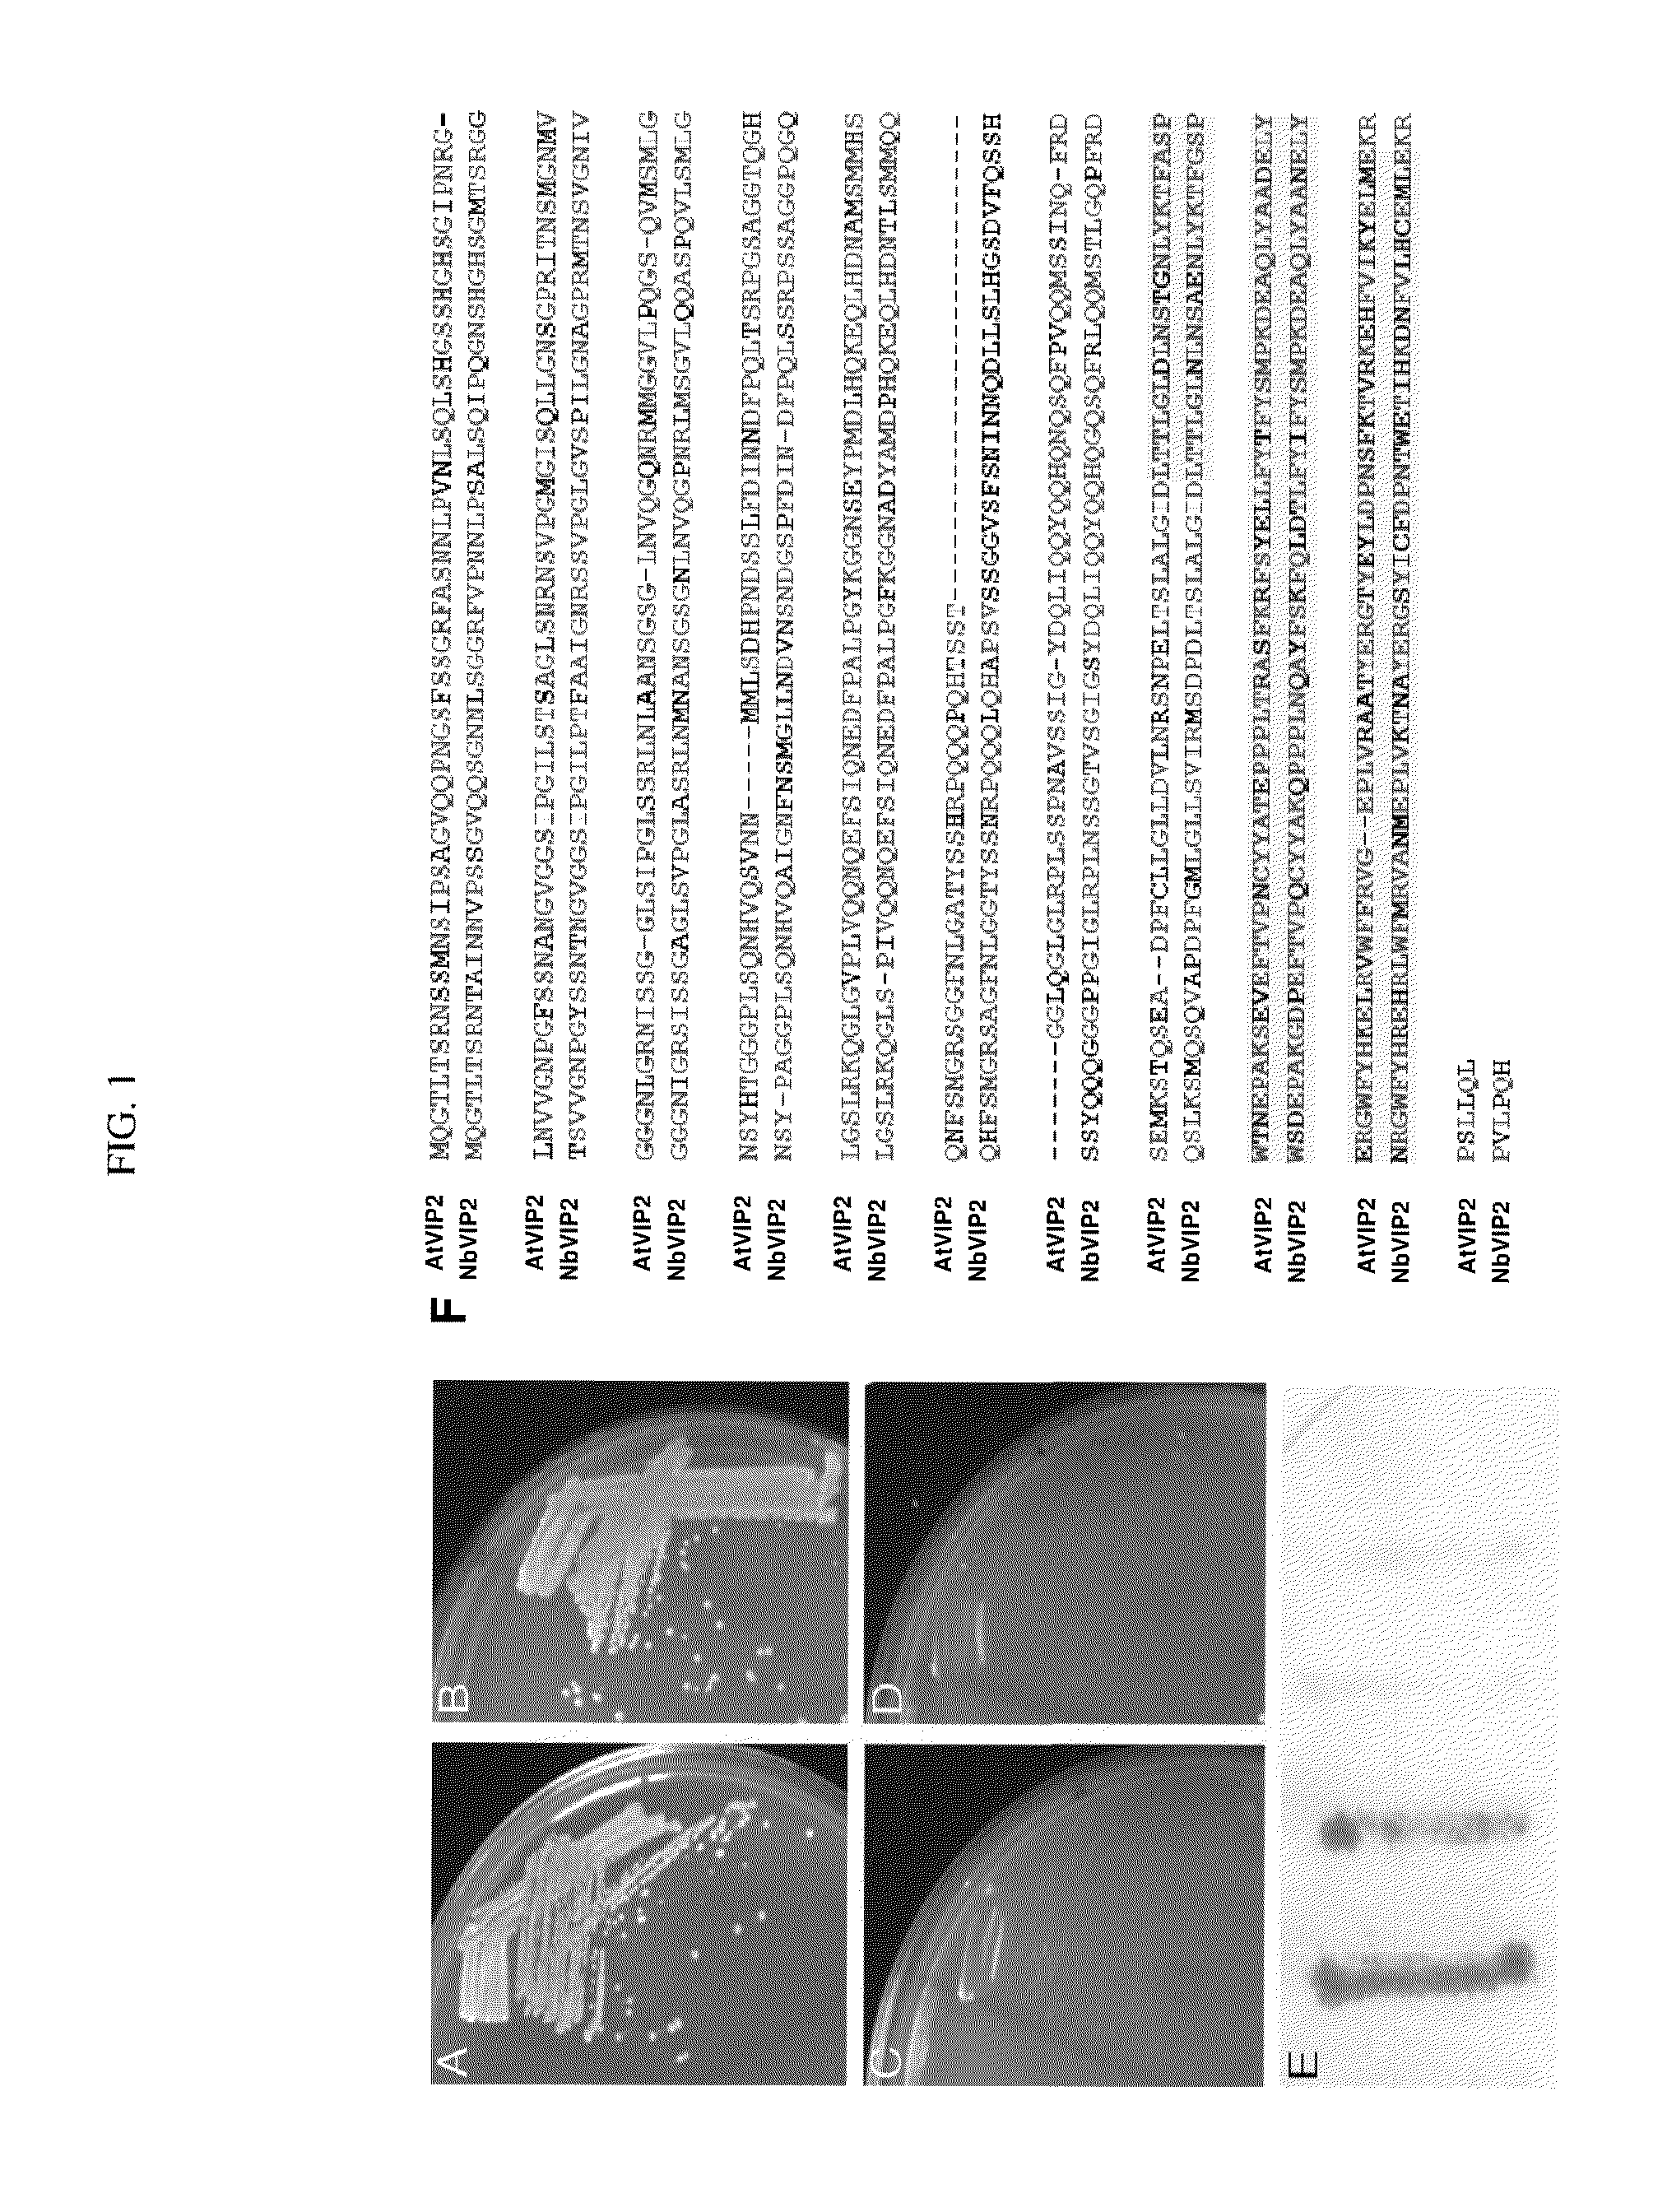 Method for agrobacterium-mediated transformation of plants